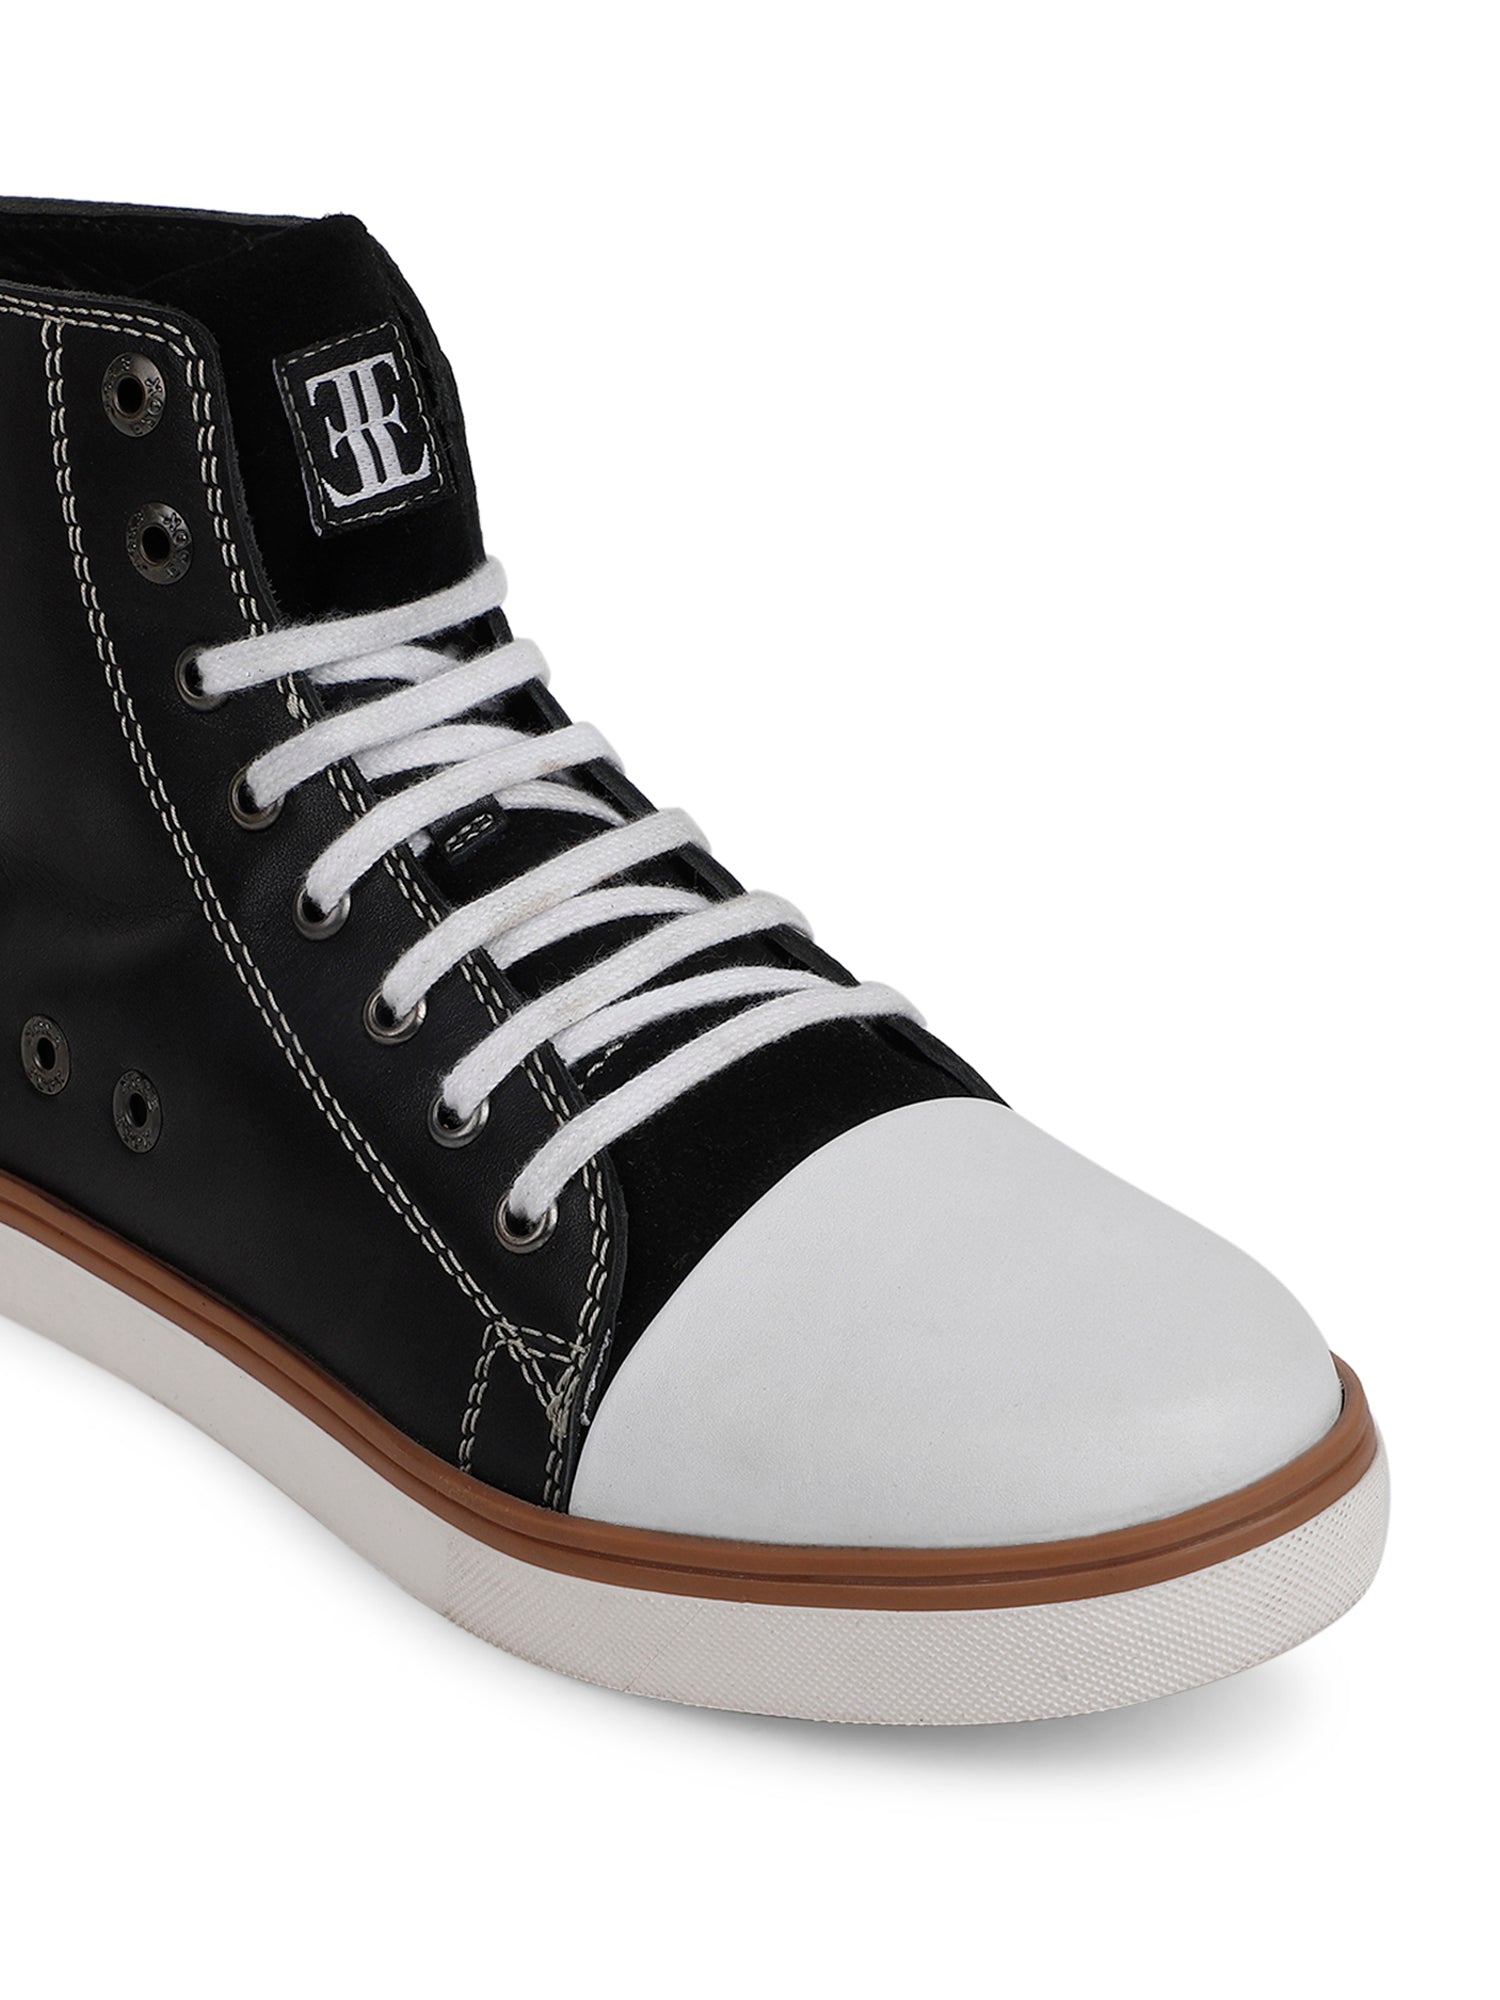 Ezok Black Lace-ups Leather Sneakers For Men